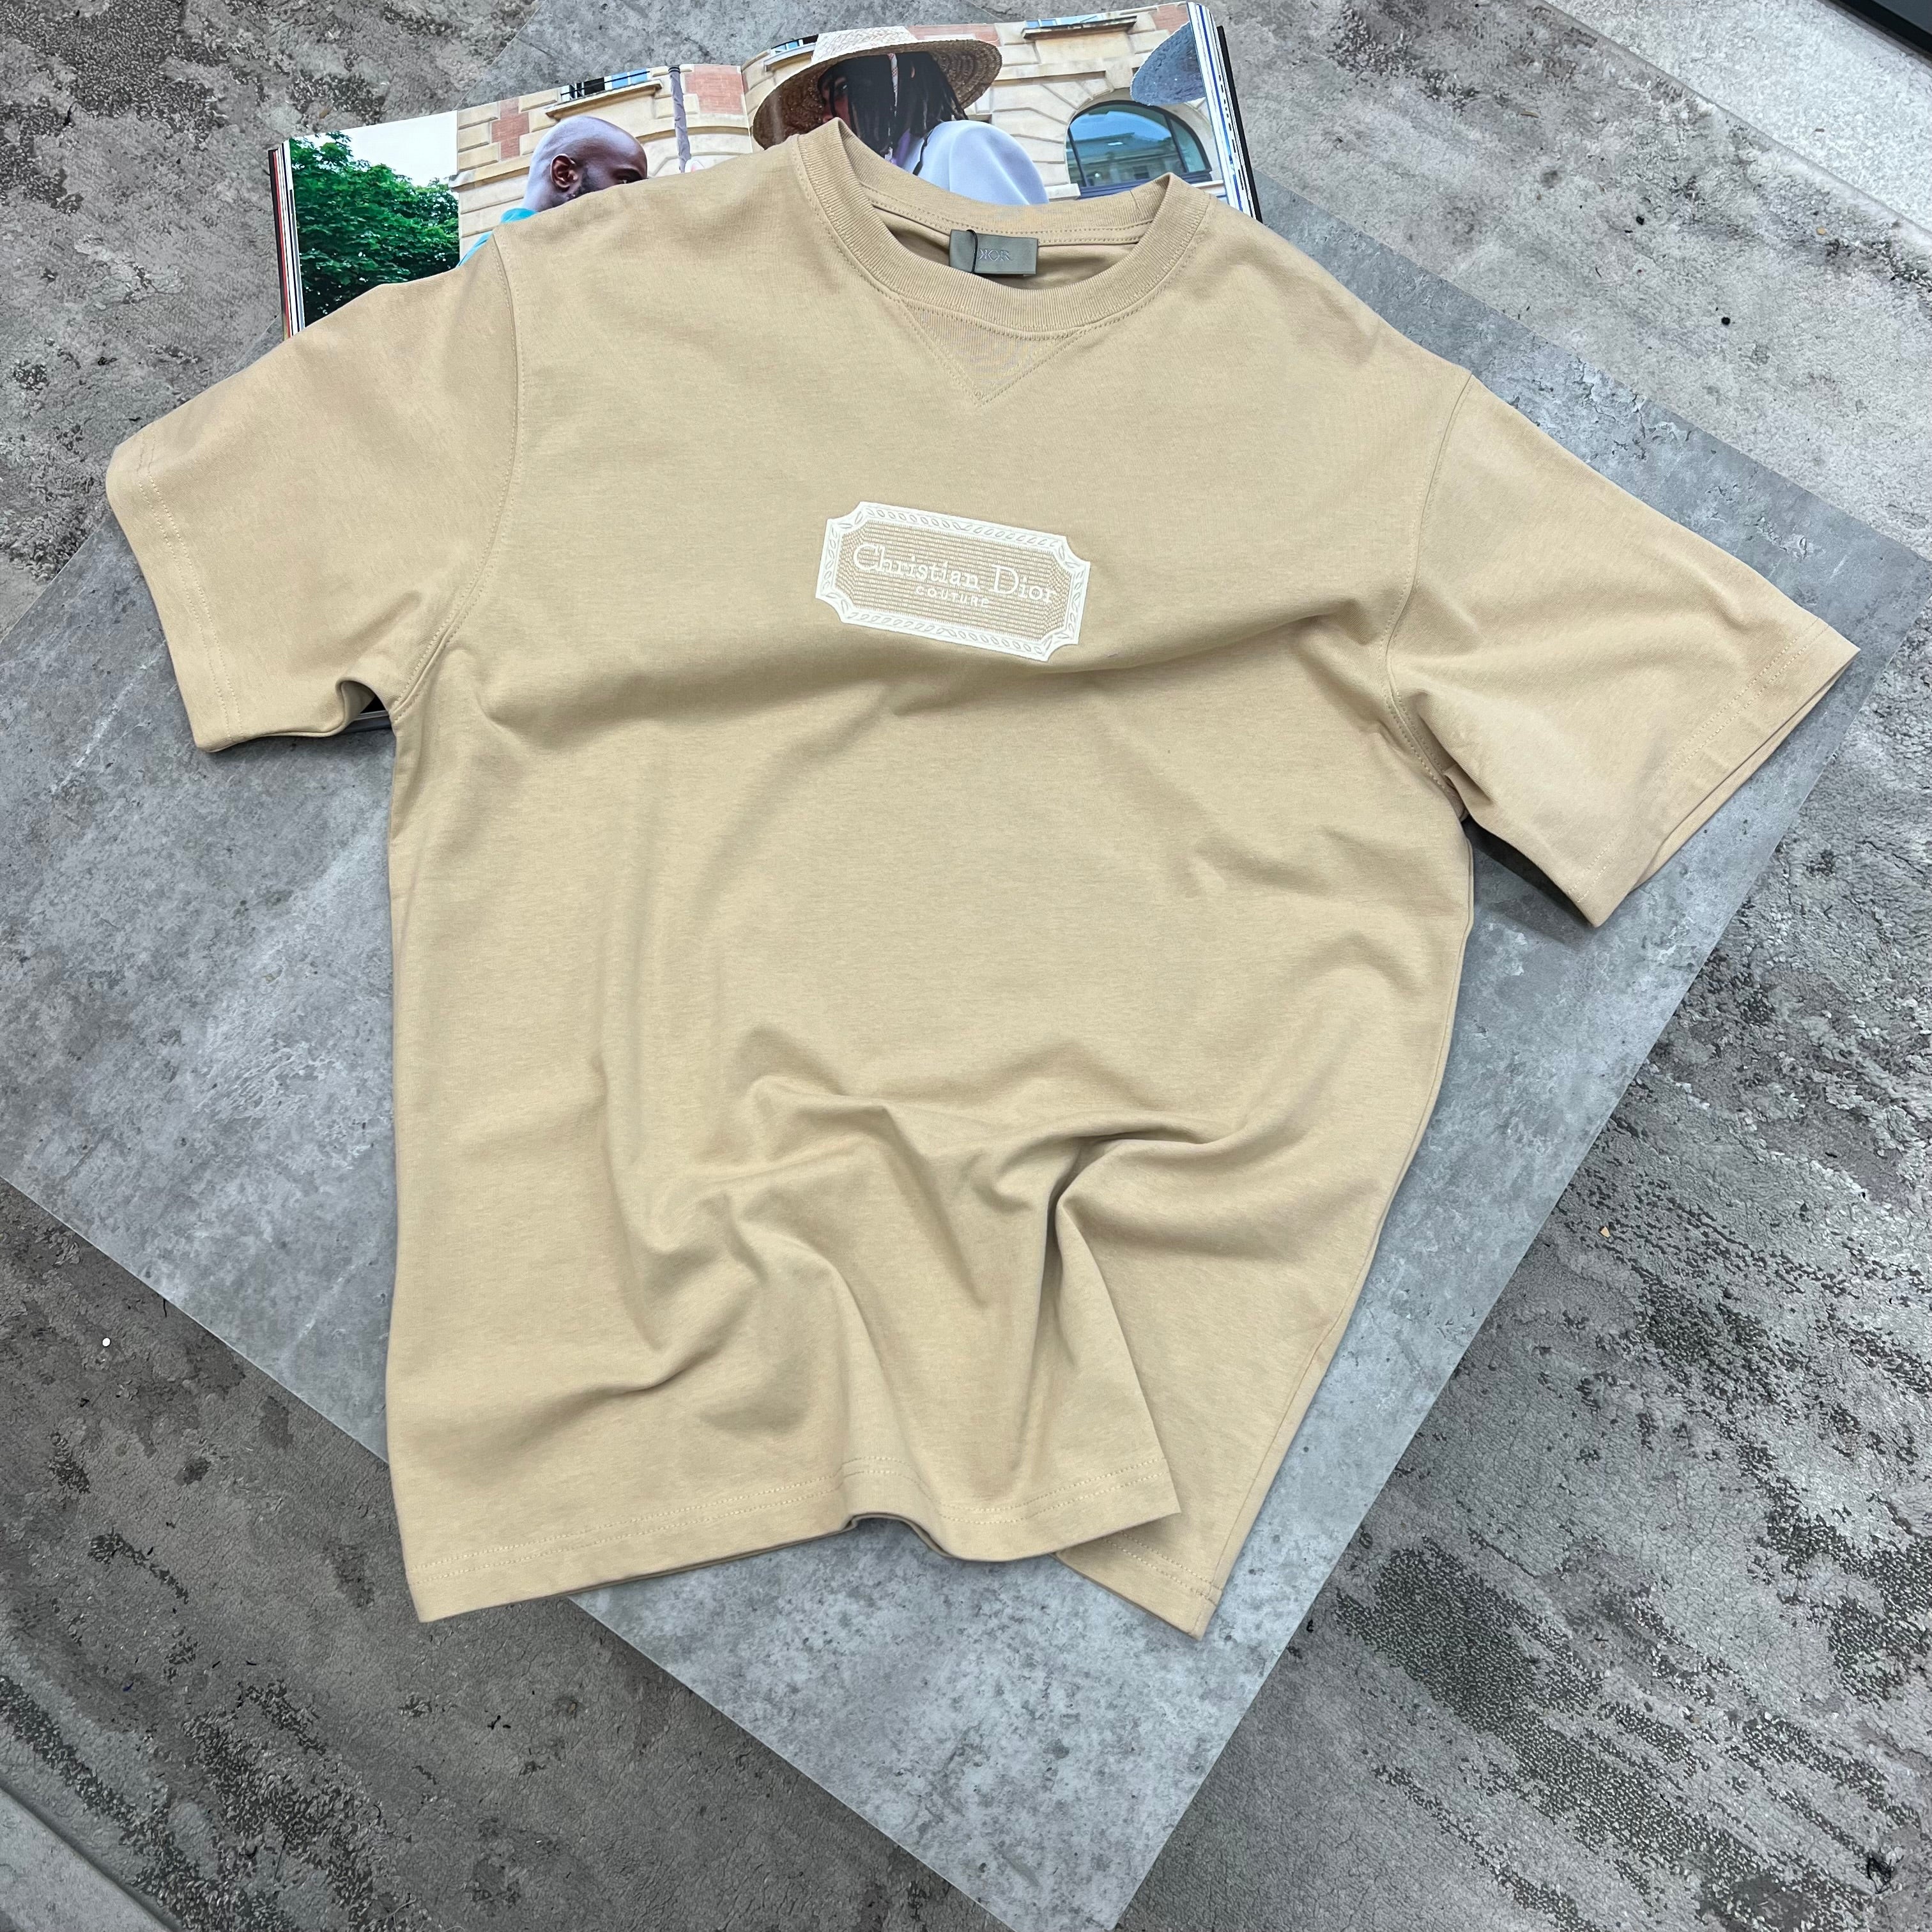 DIOR - COUTURE T-SHIRT - BEIGE